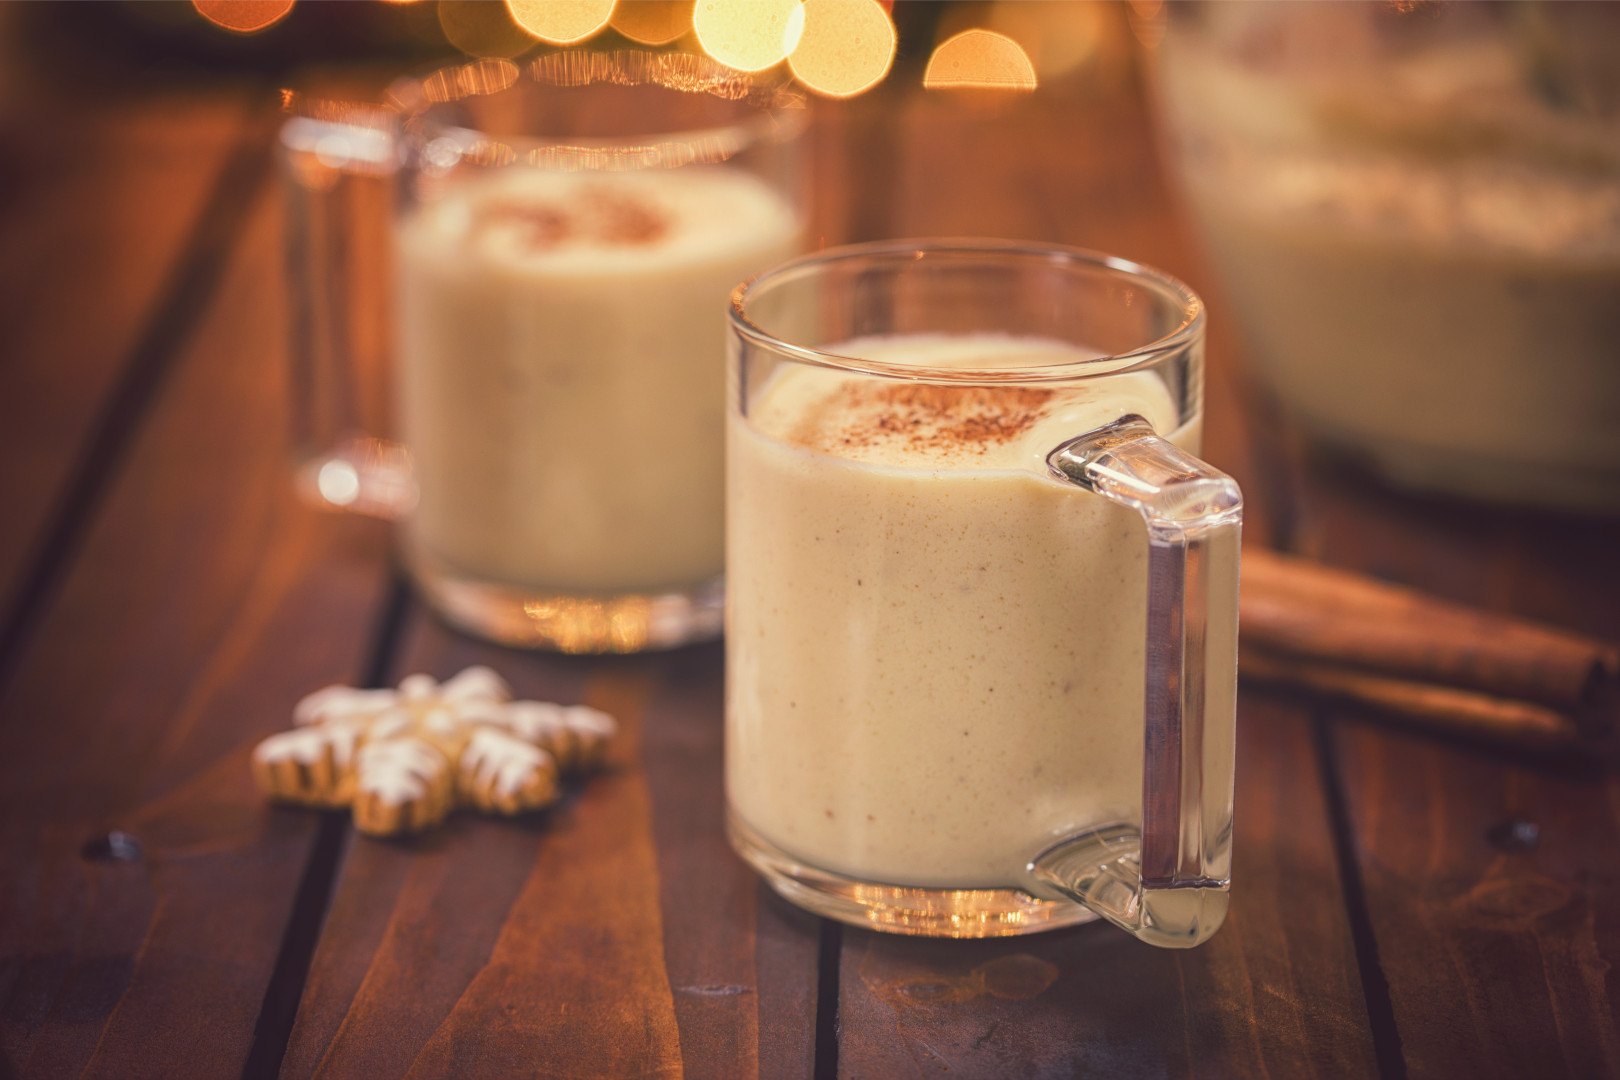 Two mugs of eggnog sitting on a wooden surface